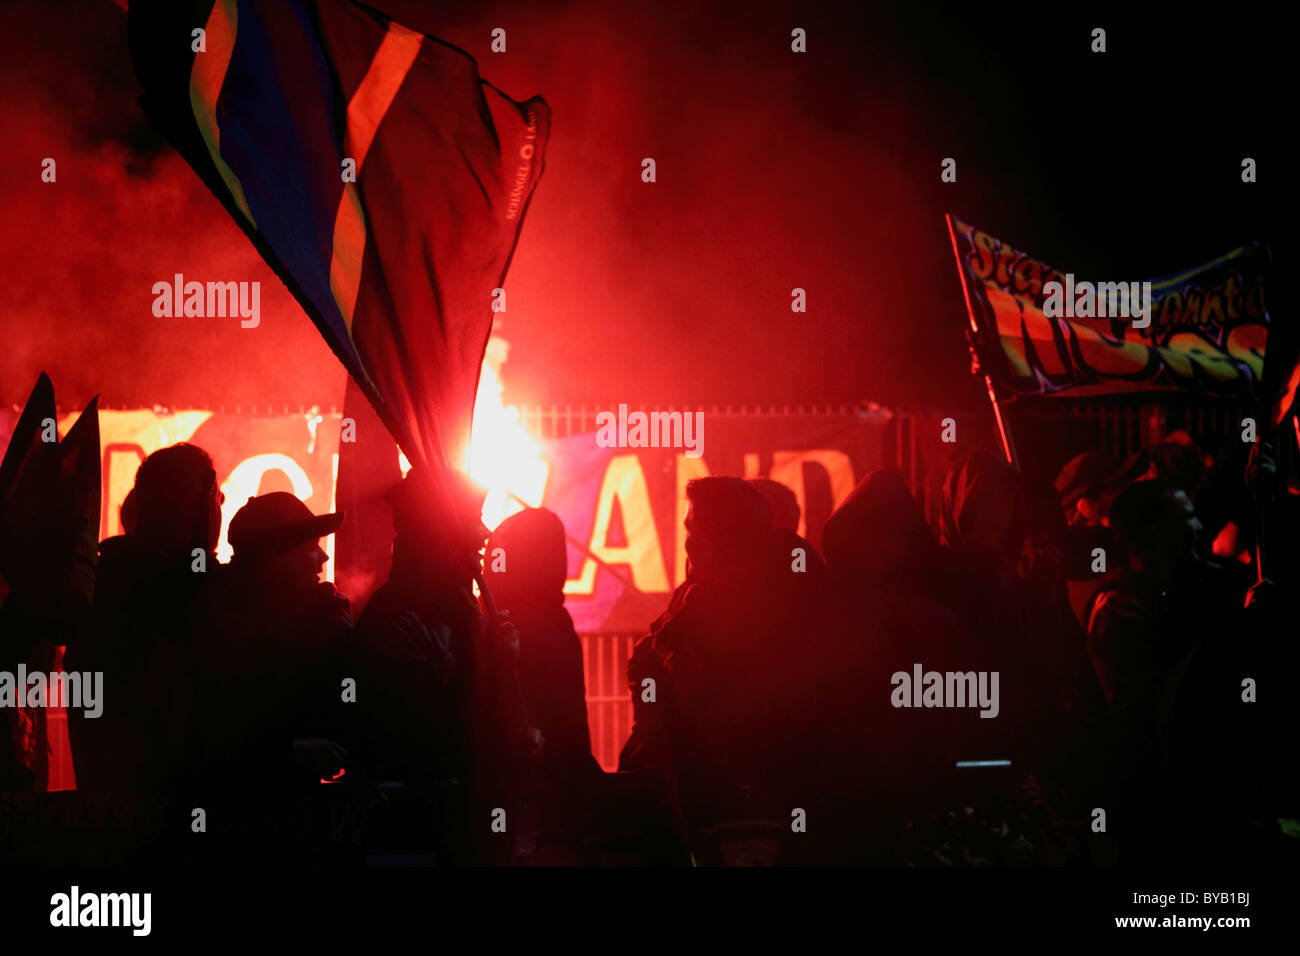 Football fans have set off fireworks at the Rheinlandpokal match of the third division team TuS Koblenz against Immendorf Stock Photo